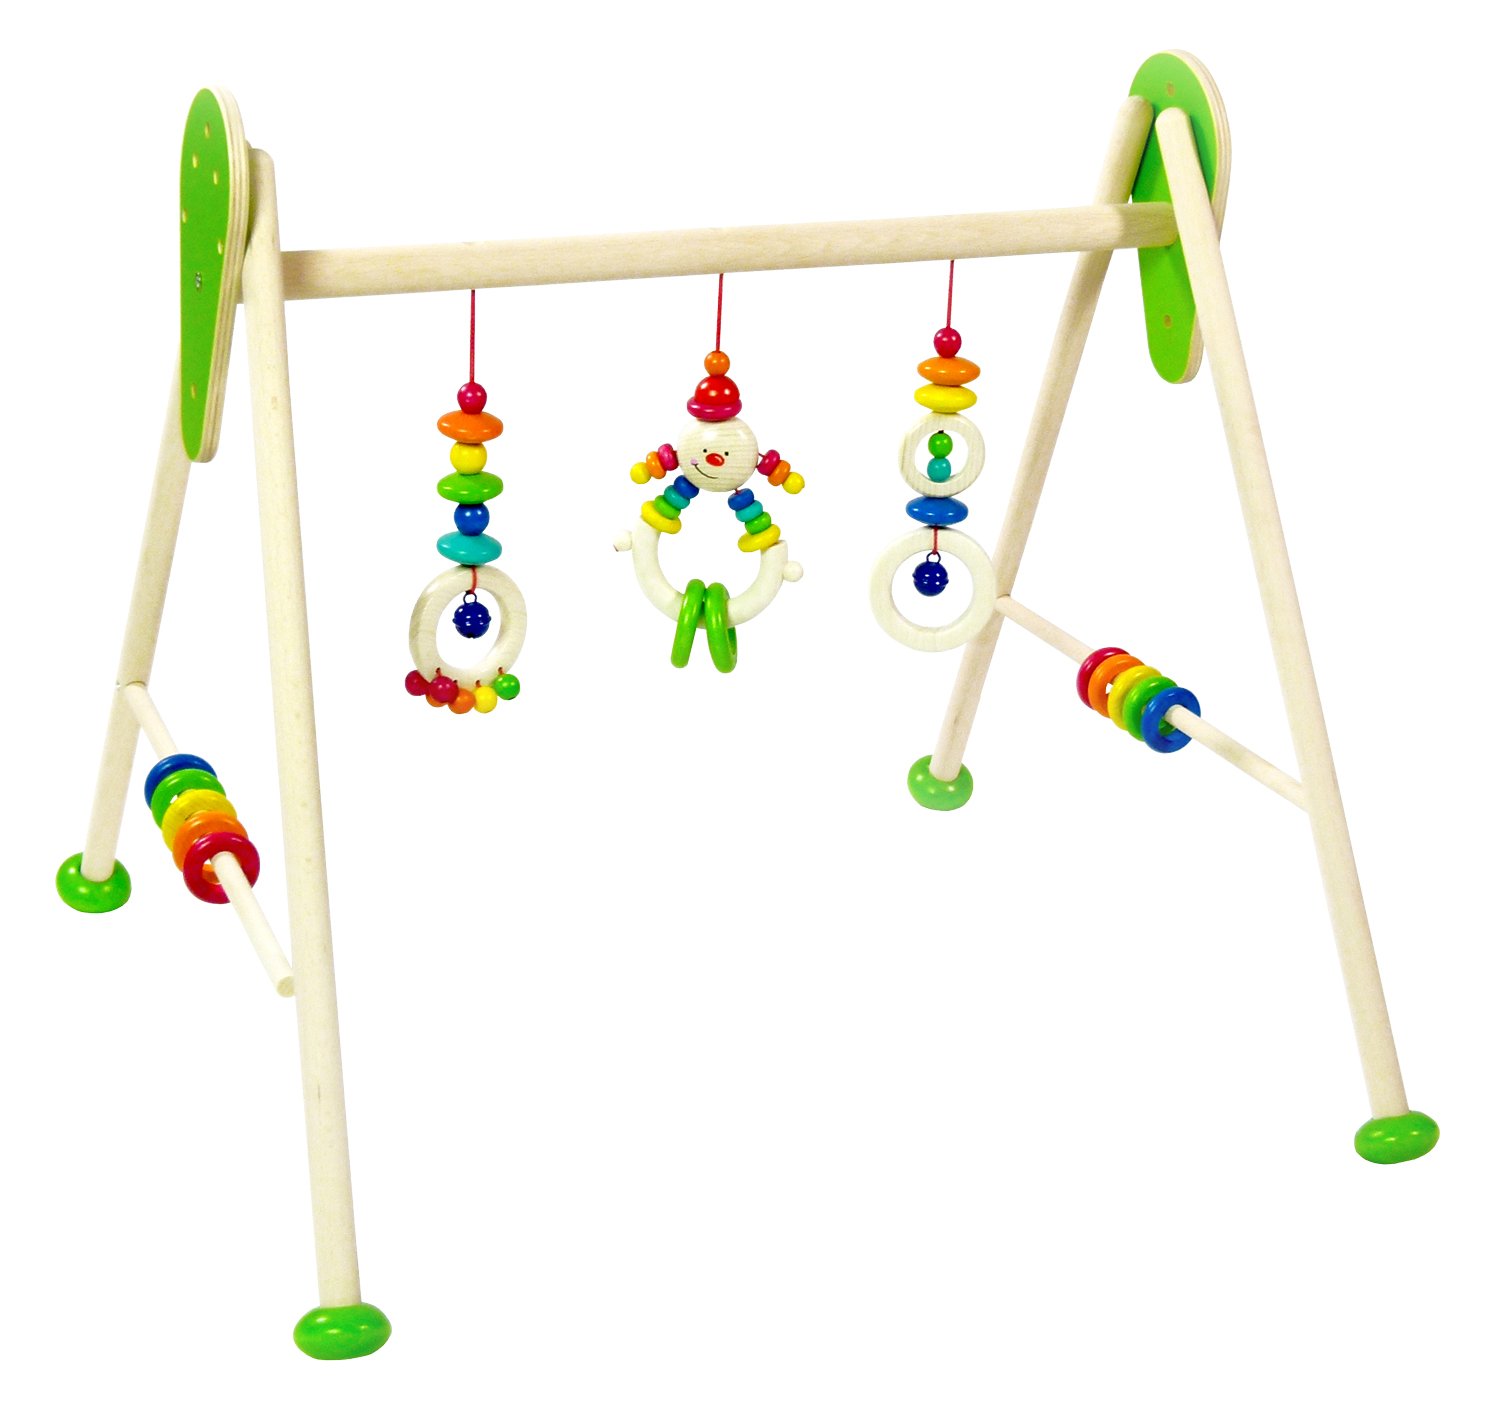 Hess Wooden Toy Michel Series 13378 Wooden Toy for Babies Handmade Play Arch with Colourful Figures and Rattles Approx. 62 x 55 x 50 cm